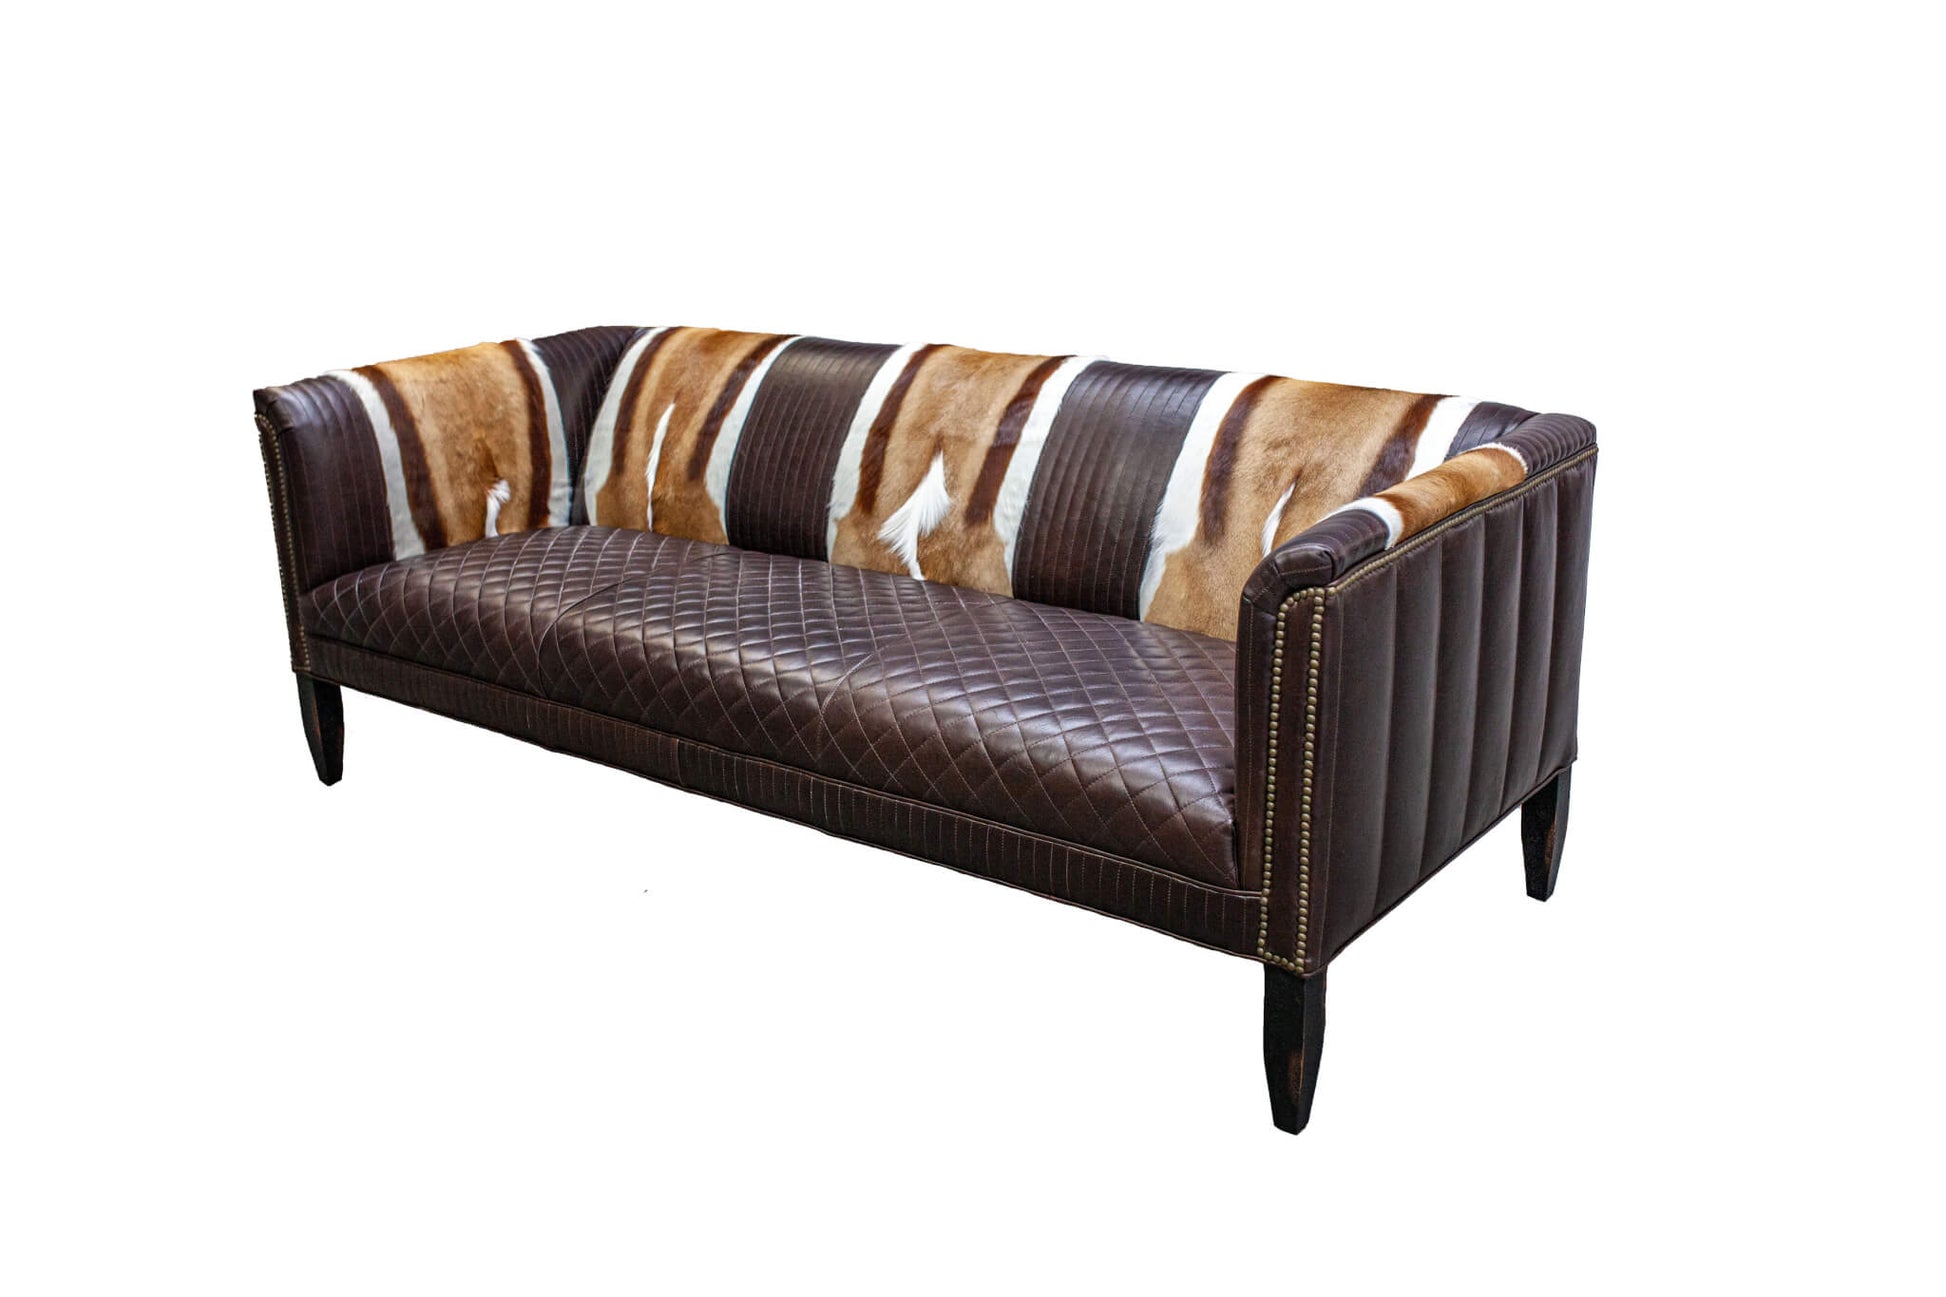 Bring modern luxury to your home with this stylish quilted nailhead sofa. Crafted from durable materials, this sofa is sure to last for years. Featuring a quilted finish and modern nailhead accents, this sofa will provide a sophisticated feel to any room.